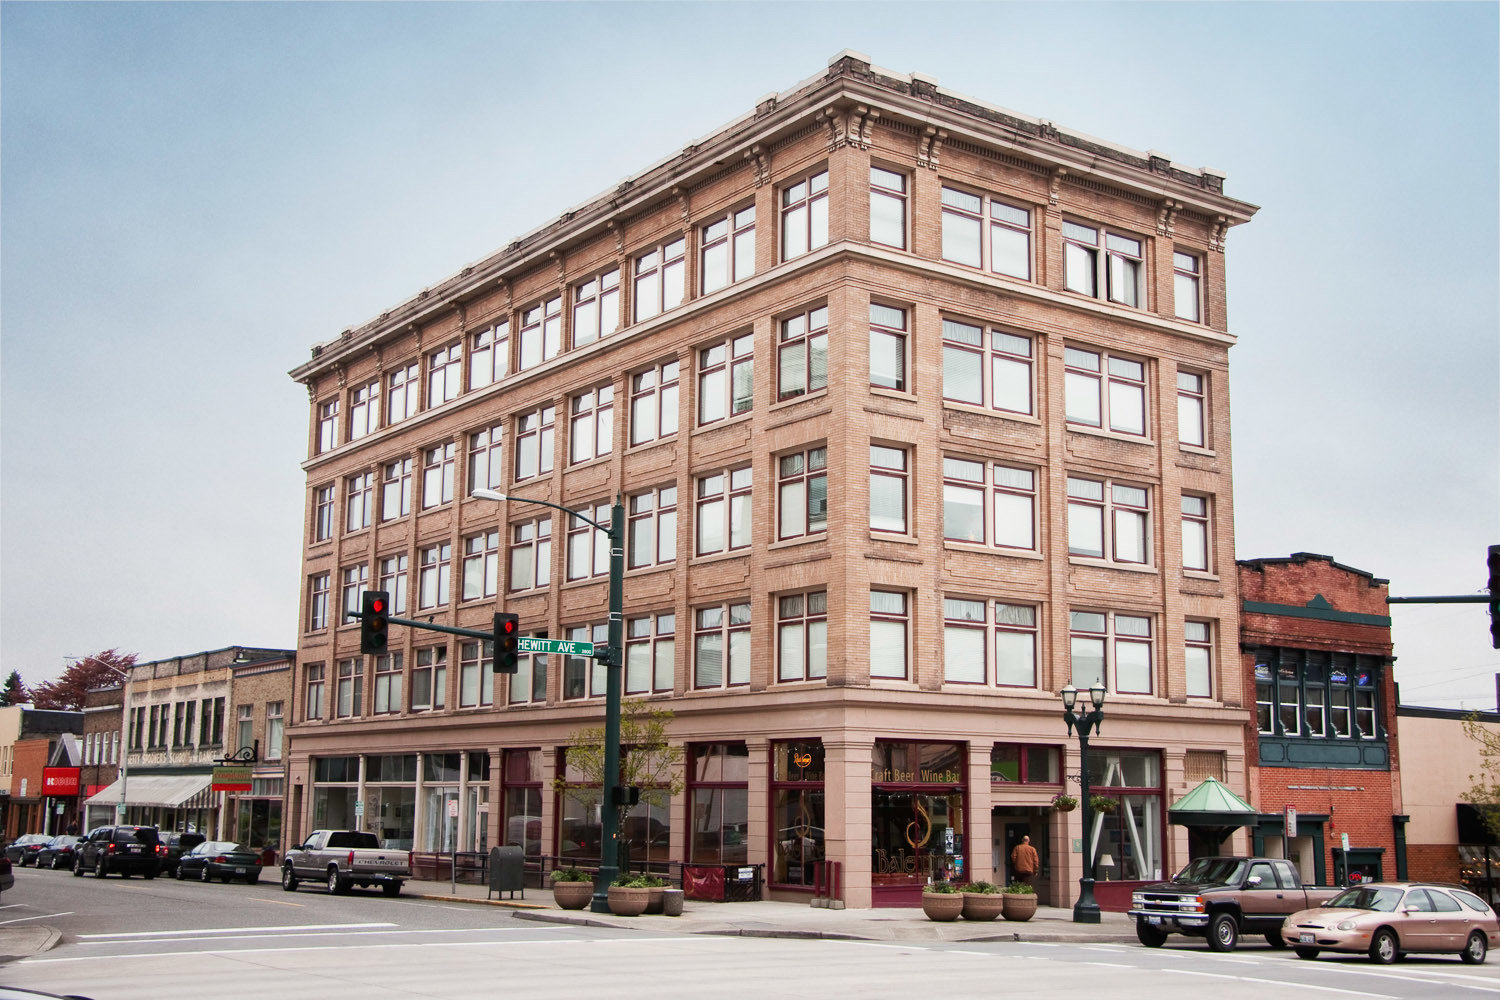 Everett Commerce Building (Specialty Project)